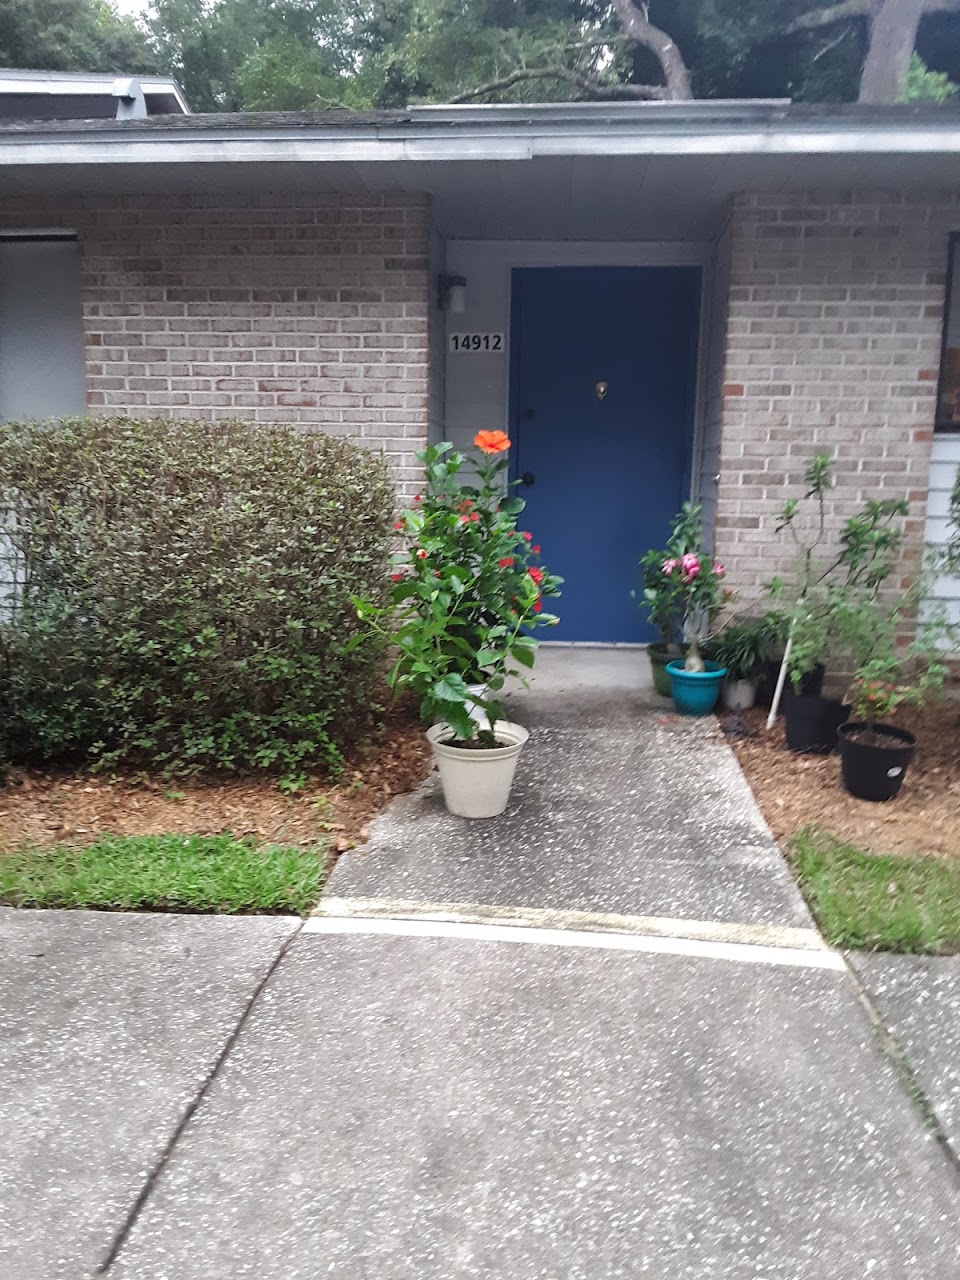 Photo of OAKCREST II. Affordable housing located at 14940 WILLOWBROOK DR DADE CITY, FL 33523